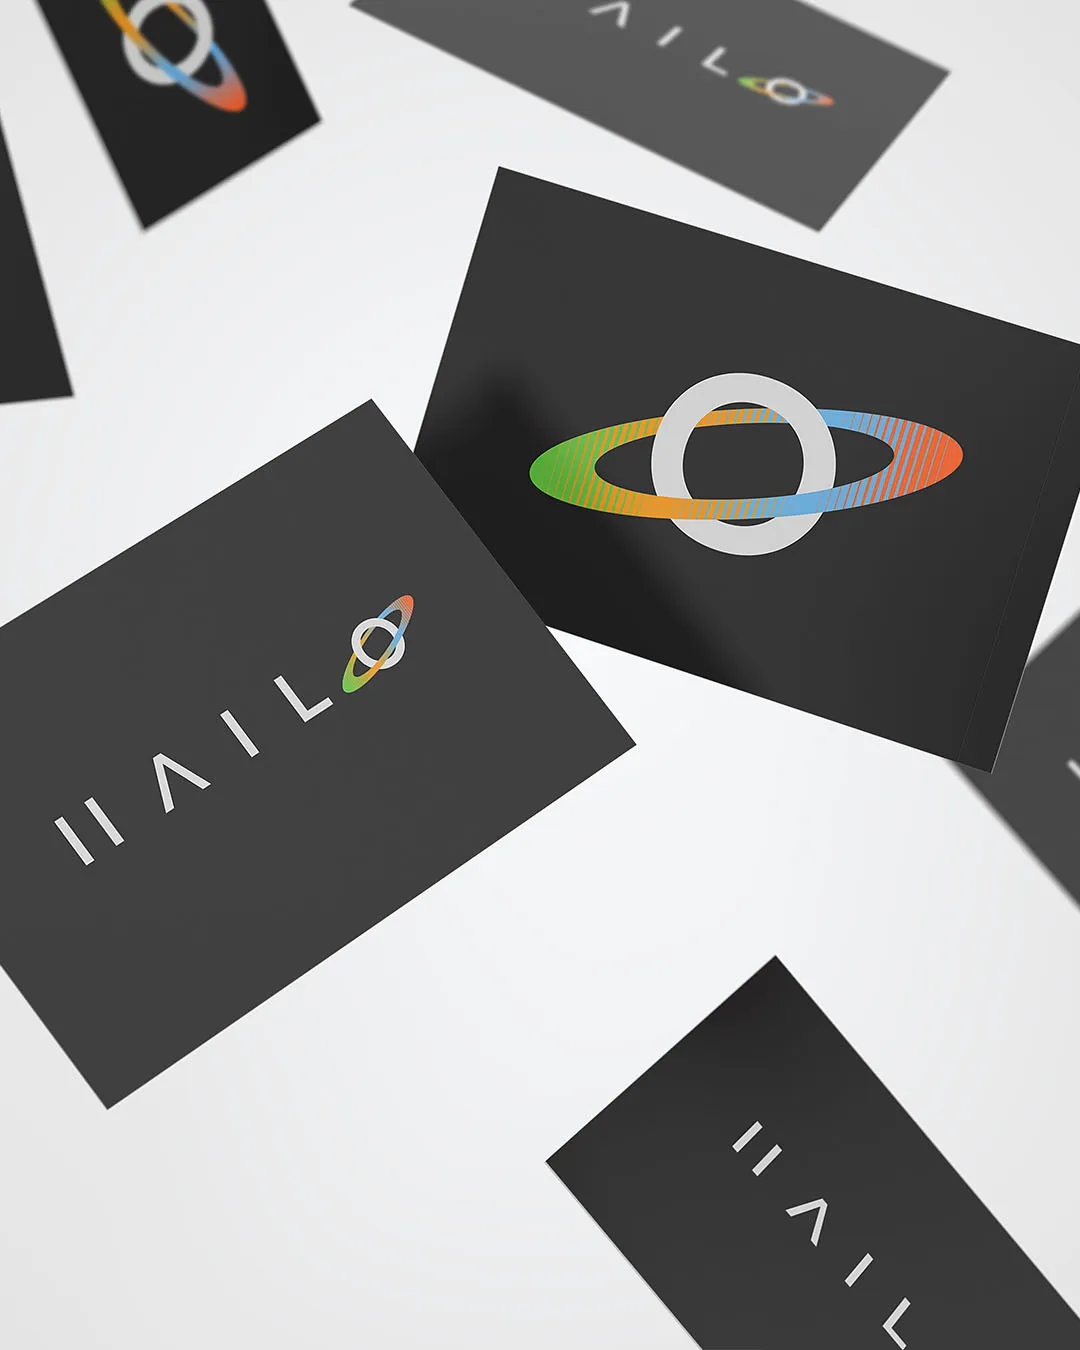 Two versons of the HAILO logo mocked up on a business card- one which has the name of the project and the other which has the icon for it.